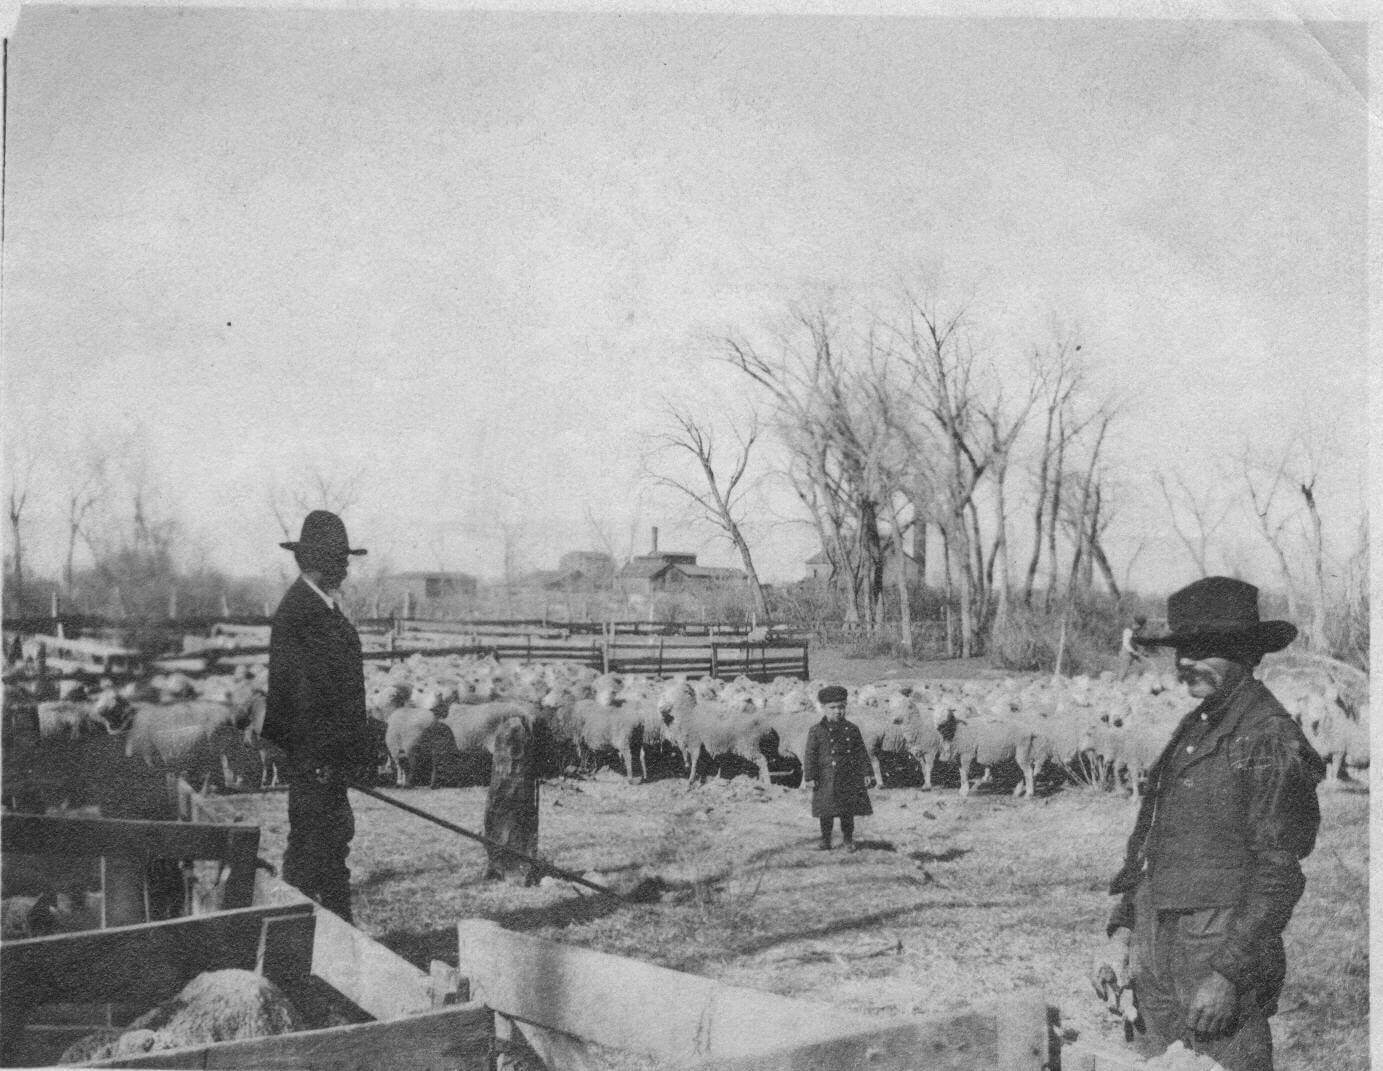 Sheep at the Goslen Brothers Cam at the Sugar Factory yards in 1885. Photo # 1983.54.1, Museums of Western Colorado.